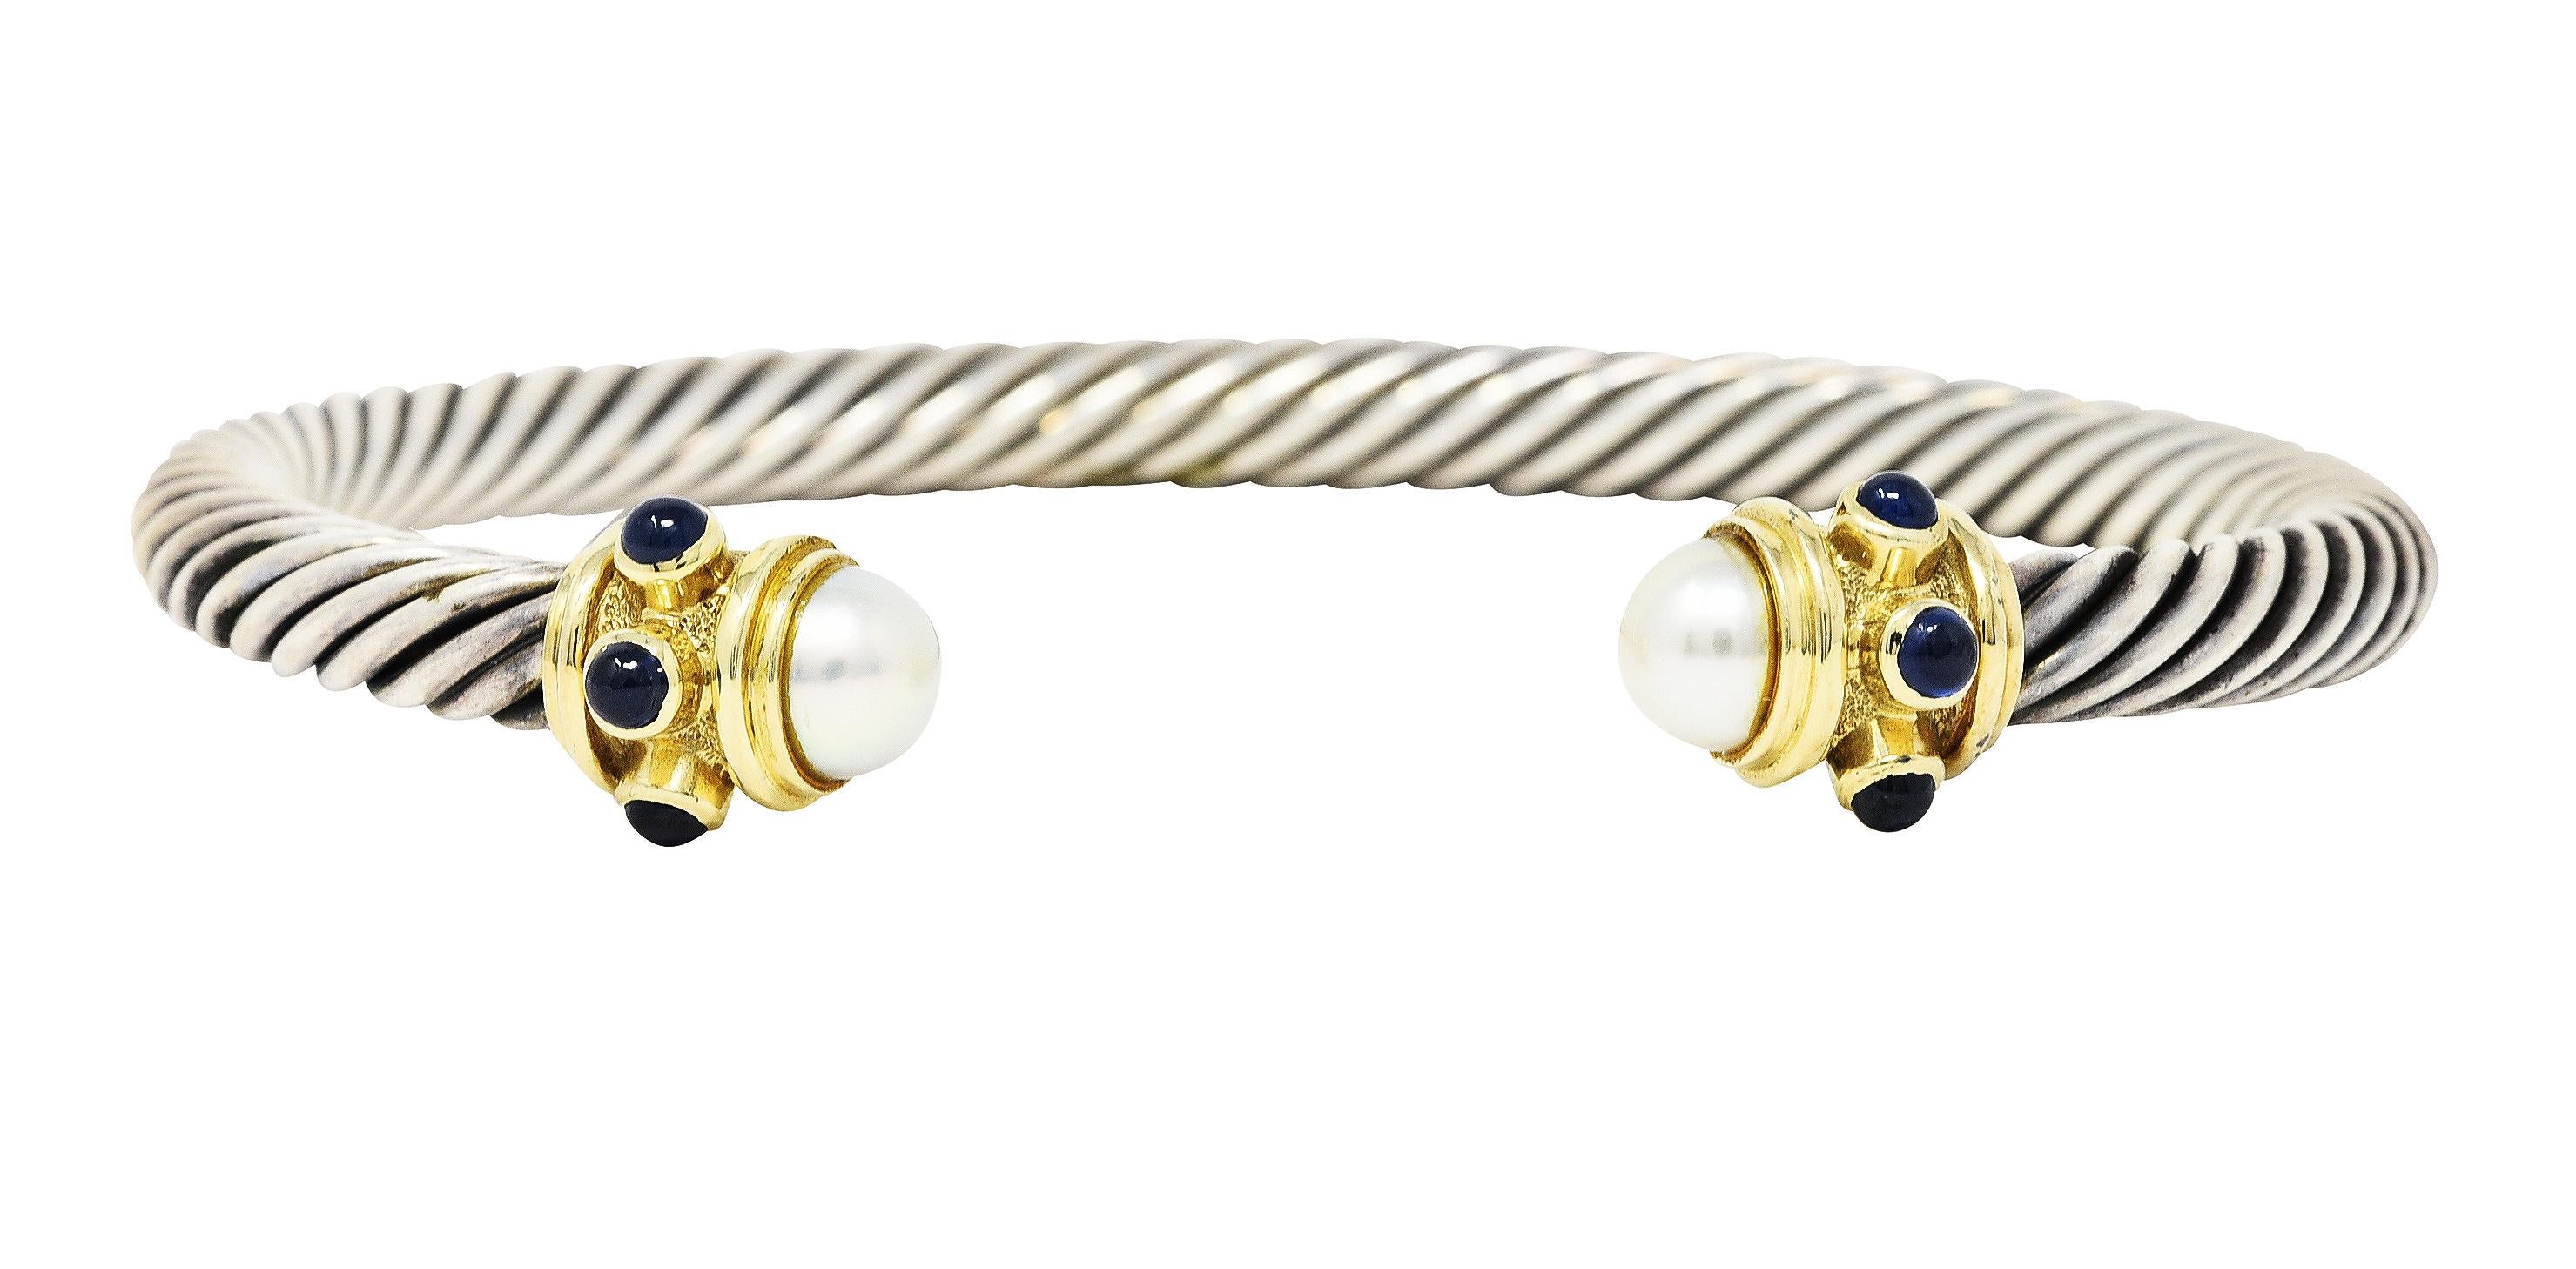 Designed as an open cuff bracelet comprised of twisting sterling silver cable 

Deeply ridged gold terminals completed by 6.0 mm round mabe pearl cabochons

Pearls are white in body color with very good luster

Accented by bezel set medium blue 2.5